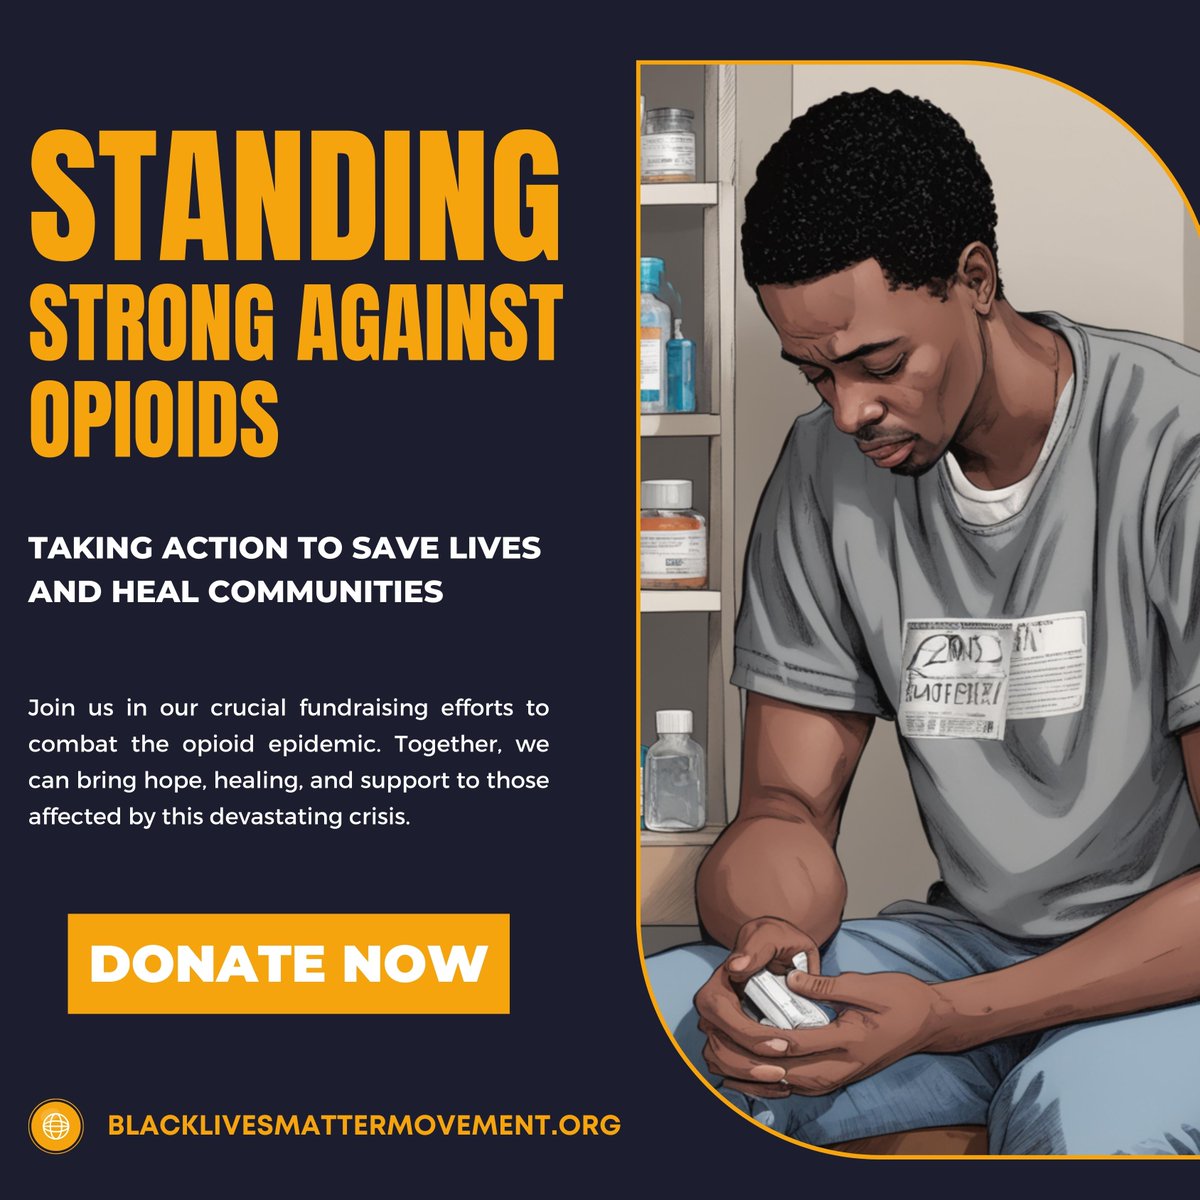 Taking Action Against the Opioid Epidemic 🌟 Taking Action to Save Lives and Heal Communities.
#OpioidEpidemicAwareness #HealingCommunities #TogetherAgainstAddiction #SupportAndHope #SaveLivesNow #CommunityRevitalization #BeTheChangeYouWishToSee #DonateForACause #RecoveryJourney